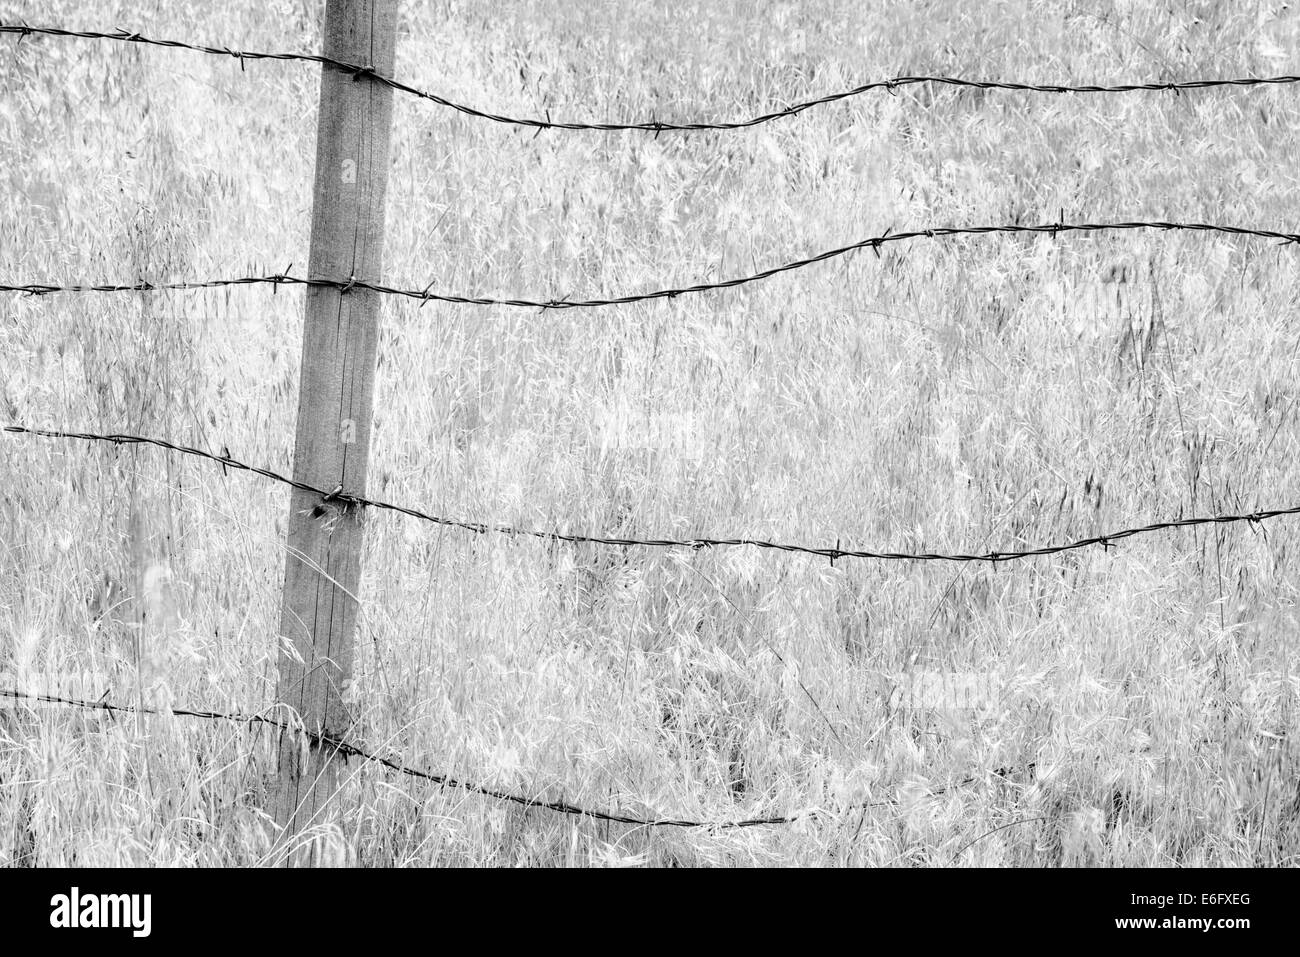 Barbed wire fence and grasses. Oregon.  Hells Canyon National Recreation Area, Oregon Stock Photo